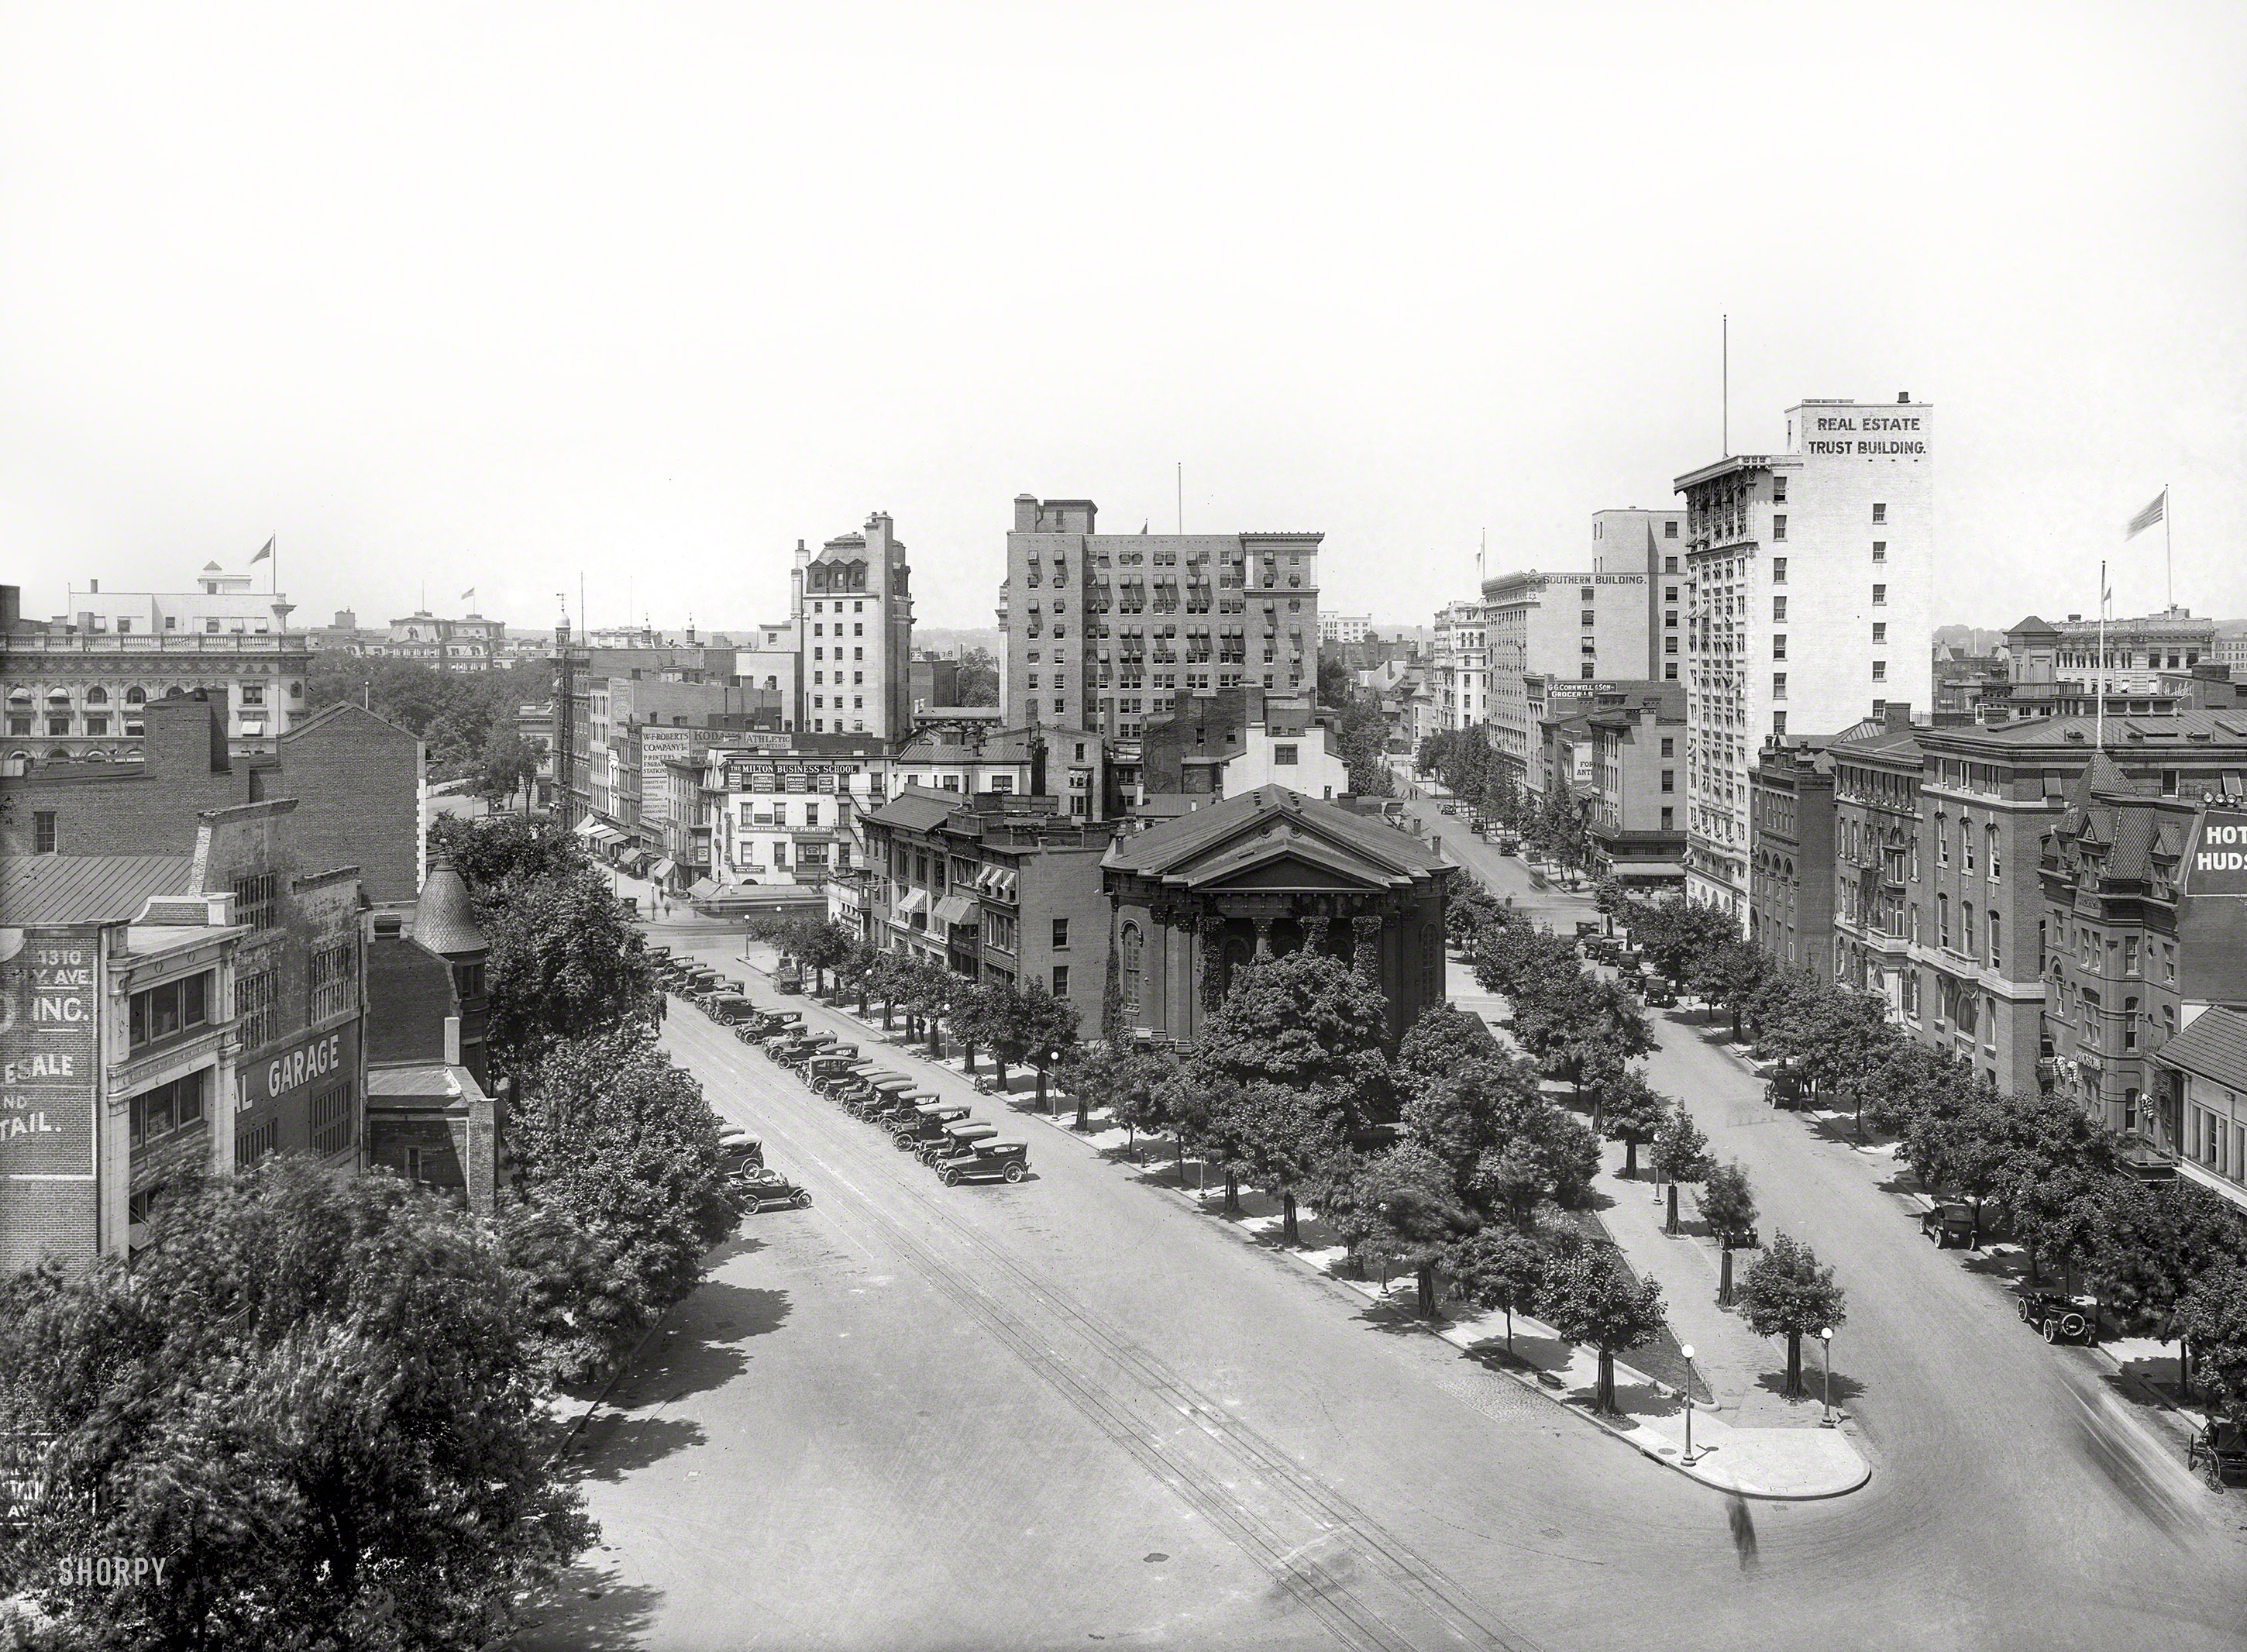 Washington, D.C., circa 1917. "Street scene, New York Avenue & H Street N.W., from Masonic Temple. New York Avenue Presbyterian Church with Woodward Building behind, and Southern and Real Estate Trust buildings." 8x10 inch glass negative, National Photo Company Collection. View full size.